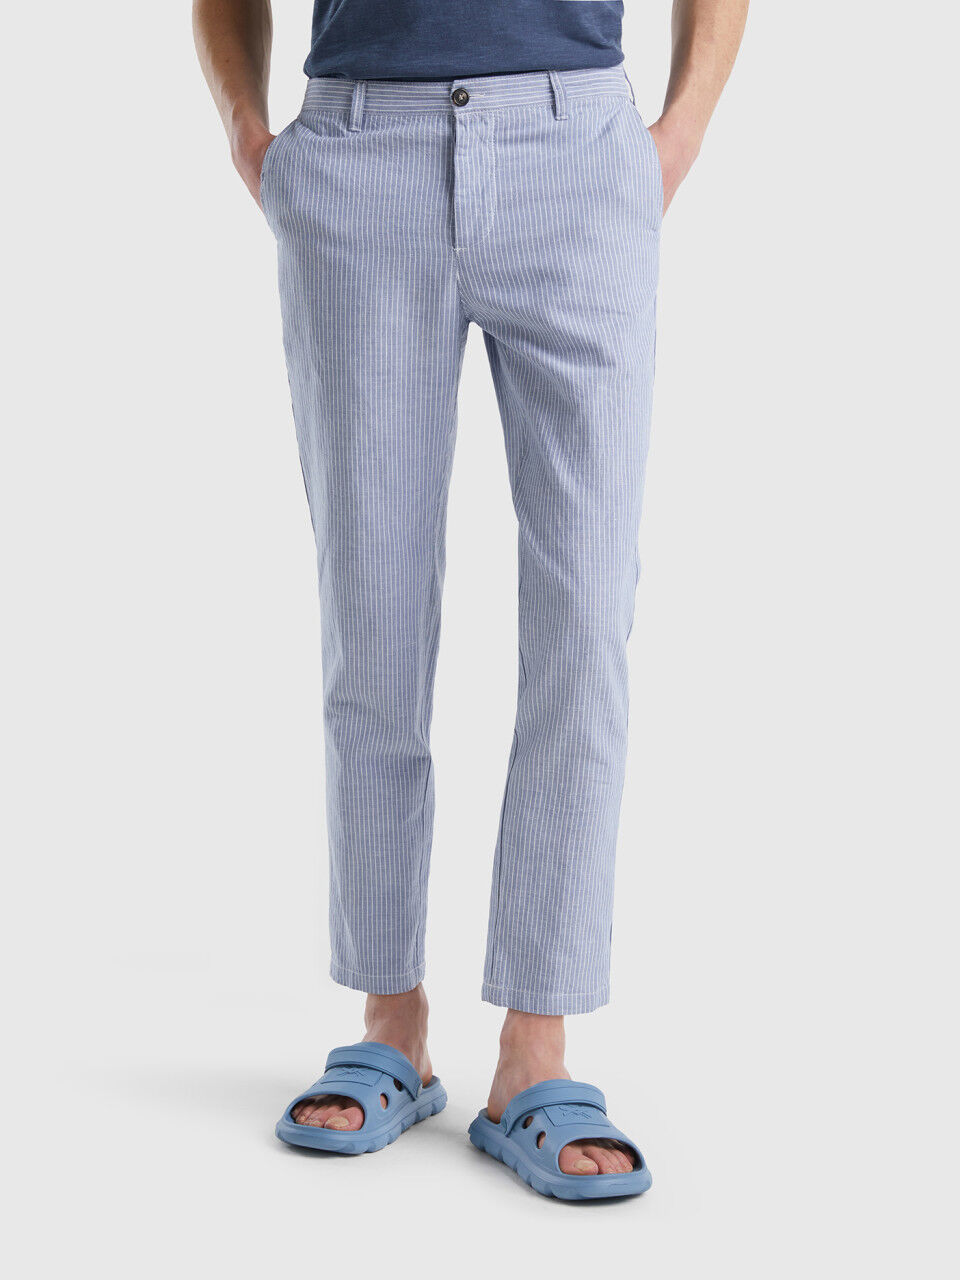 Buy United Colors of Benetton Solid Regular Fit Trousers Online